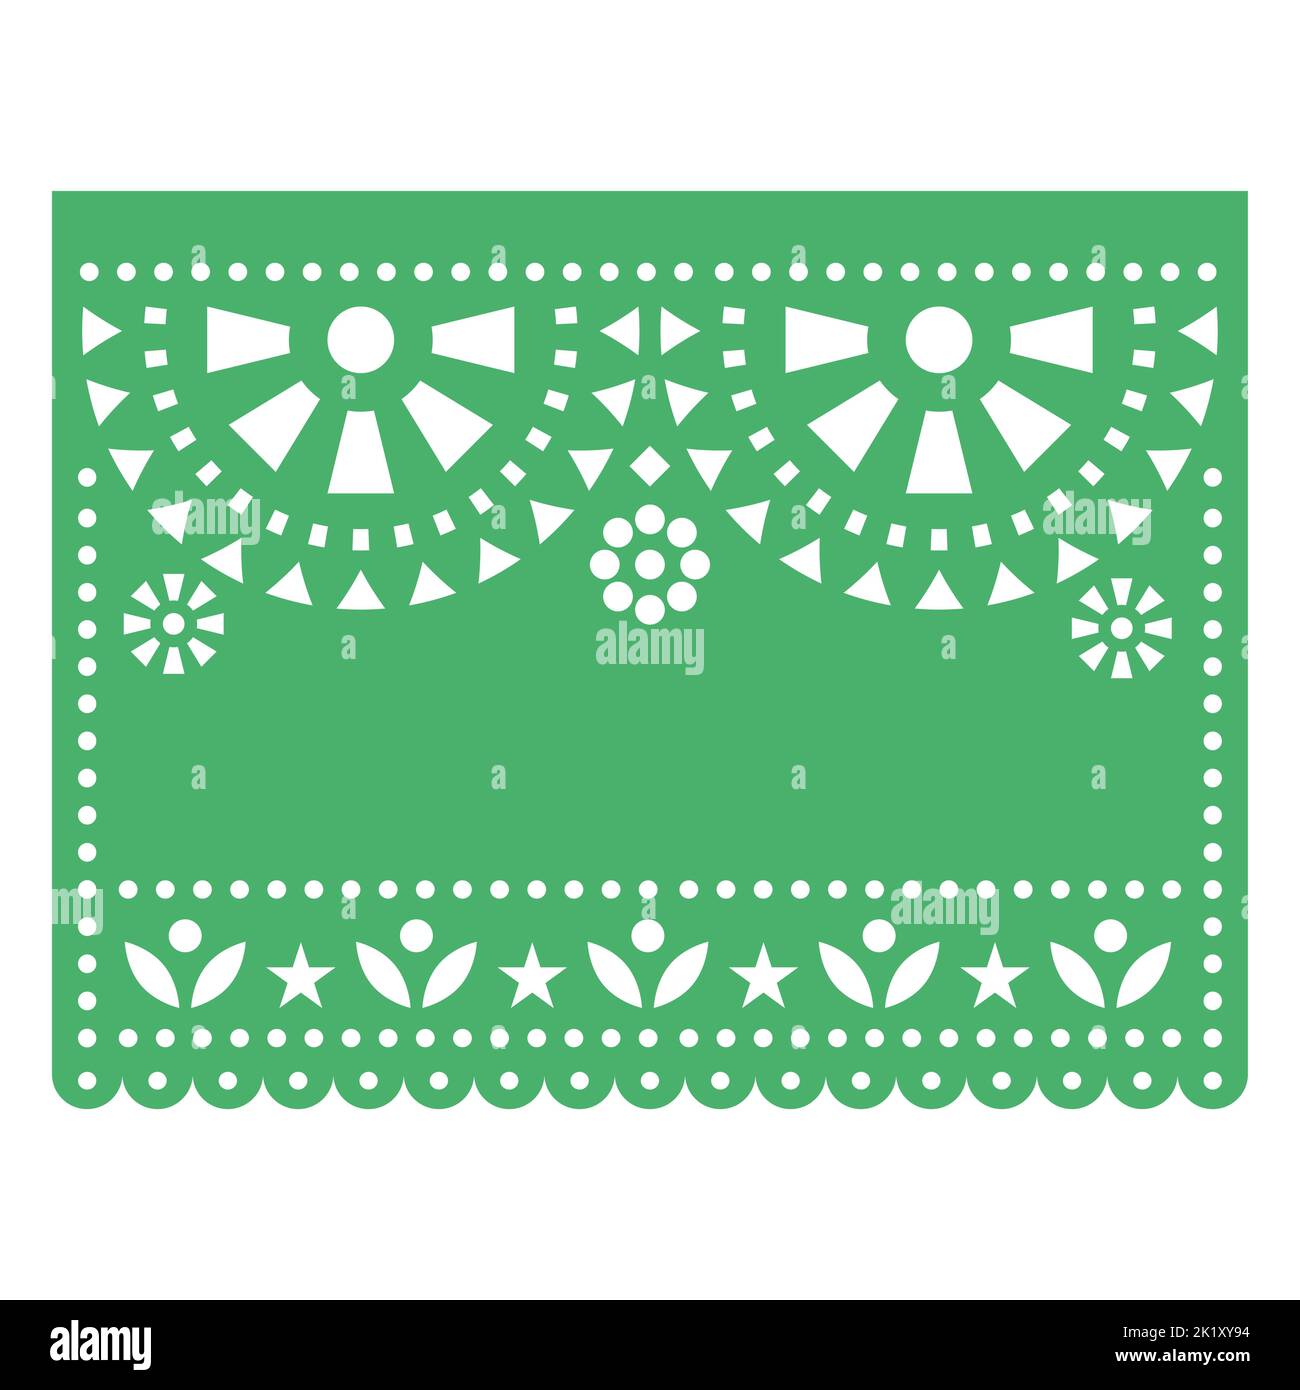 Papel Picado vector blank template Mexican design, floral green round pattern with flowers inspired by paper cutout decorations Stock Vector